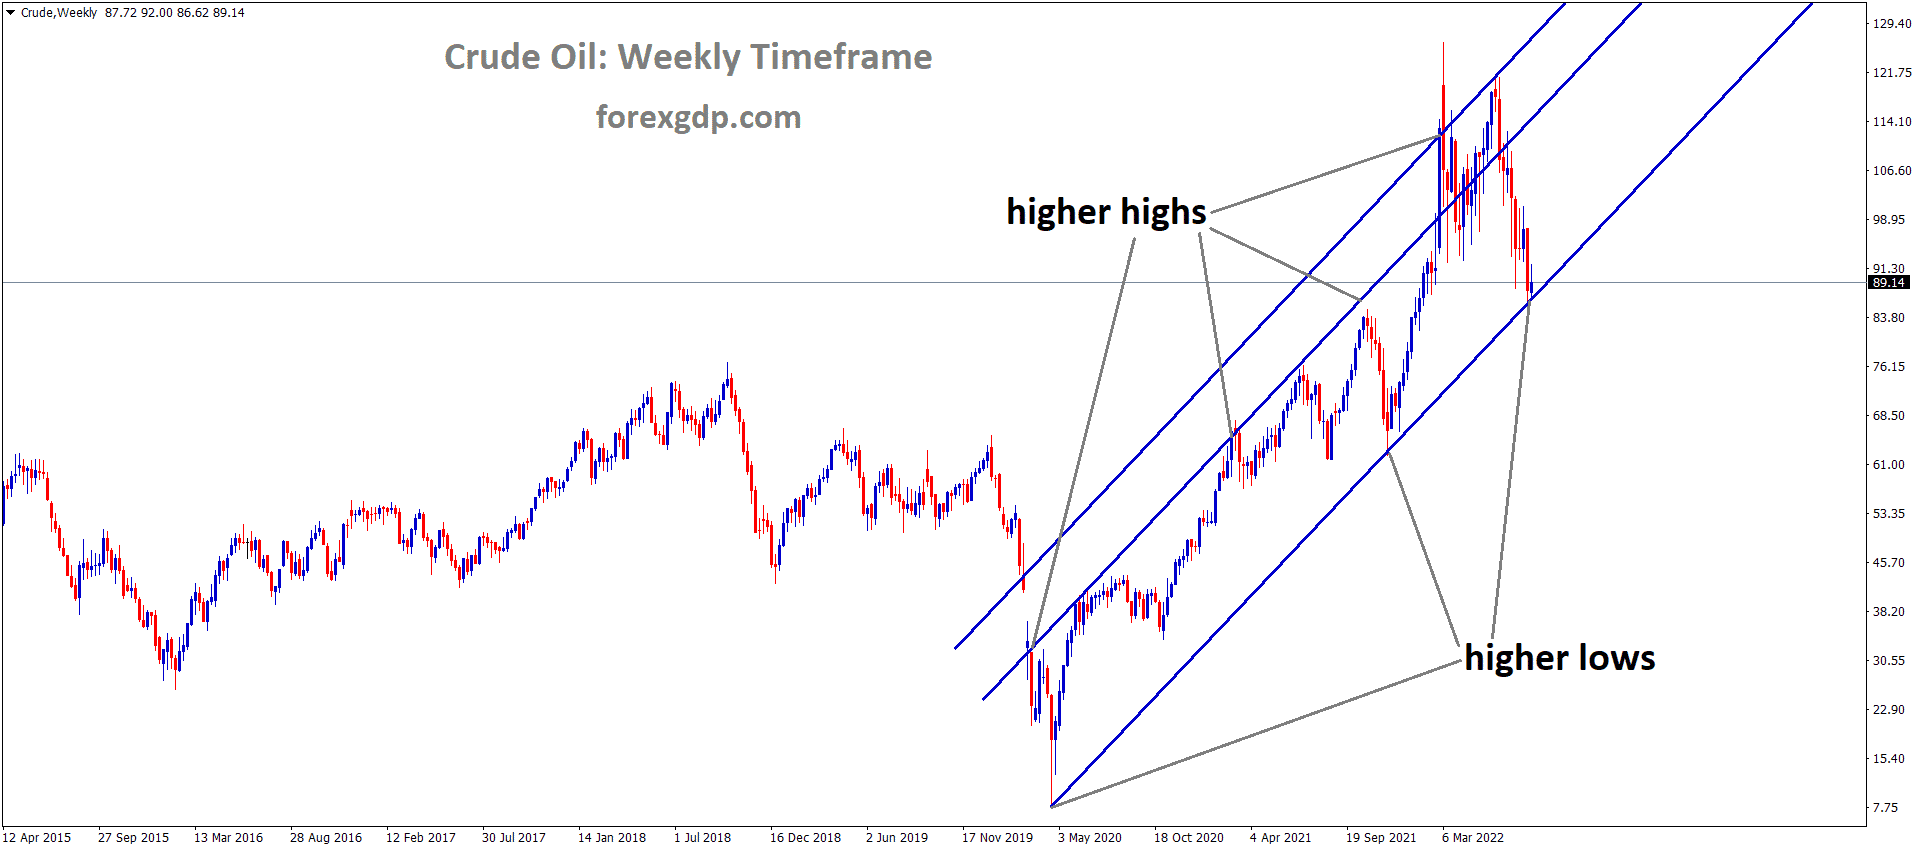 Crude oil is moving in an Ascending channel and the Market has reached the higher low area of the channel